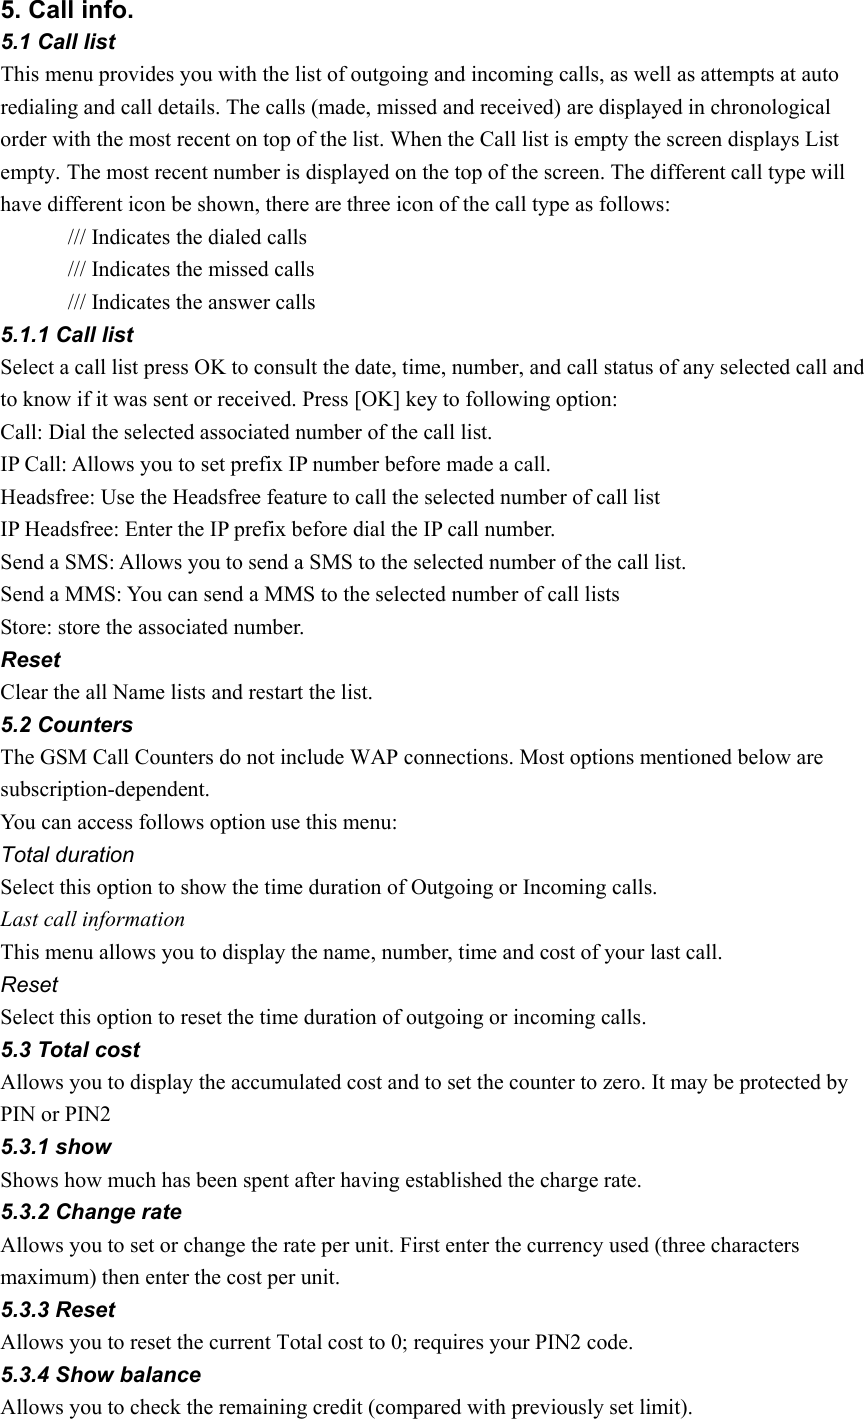 5. Call info. 5.1 Call list   This menu provides you with the list of outgoing and incoming calls, as well as attempts at auto redialing and call details. The calls (made, missed and received) are displayed in chronological order with the most recent on top of the list. When the Call list is empty the screen displays List empty. The most recent number is displayed on the top of the screen. The different call type will have different icon be shown, there are three icon of the call type as follows: /// Indicates the dialed calls /// Indicates the missed calls /// Indicates the answer calls 5.1.1 Call list Select a call list press OK to consult the date, time, number, and call status of any selected call and to know if it was sent or received. Press [OK] key to following option: Call: Dial the selected associated number of the call list. IP Call: Allows you to set prefix IP number before made a call.   Headsfree: Use the Headsfree feature to call the selected number of call list   IP Headsfree: Enter the IP prefix before dial the IP call number. Send a SMS: Allows you to send a SMS to the selected number of the call list. Send a MMS: You can send a MMS to the selected number of call lists   Store: store the associated number. Reset Clear the all Name lists and restart the list. 5.2 Counters The GSM Call Counters do not include WAP connections. Most options mentioned below are subscription-dependent. You can access follows option use this menu: Total duration Select this option to show the time duration of Outgoing or Incoming calls. Last call information This menu allows you to display the name, number, time and cost of your last call. Reset  Select this option to reset the time duration of outgoing or incoming calls. 5.3 Total cost Allows you to display the accumulated cost and to set the counter to zero. It may be protected by PIN or PIN2 5.3.1 show Shows how much has been spent after having established the charge rate. 5.3.2 Change rate Allows you to set or change the rate per unit. First enter the currency used (three characters maximum) then enter the cost per unit. 5.3.3 Reset Allows you to reset the current Total cost to 0; requires your PIN2 code. 5.3.4 Show balance Allows you to check the remaining credit (compared with previously set limit). 